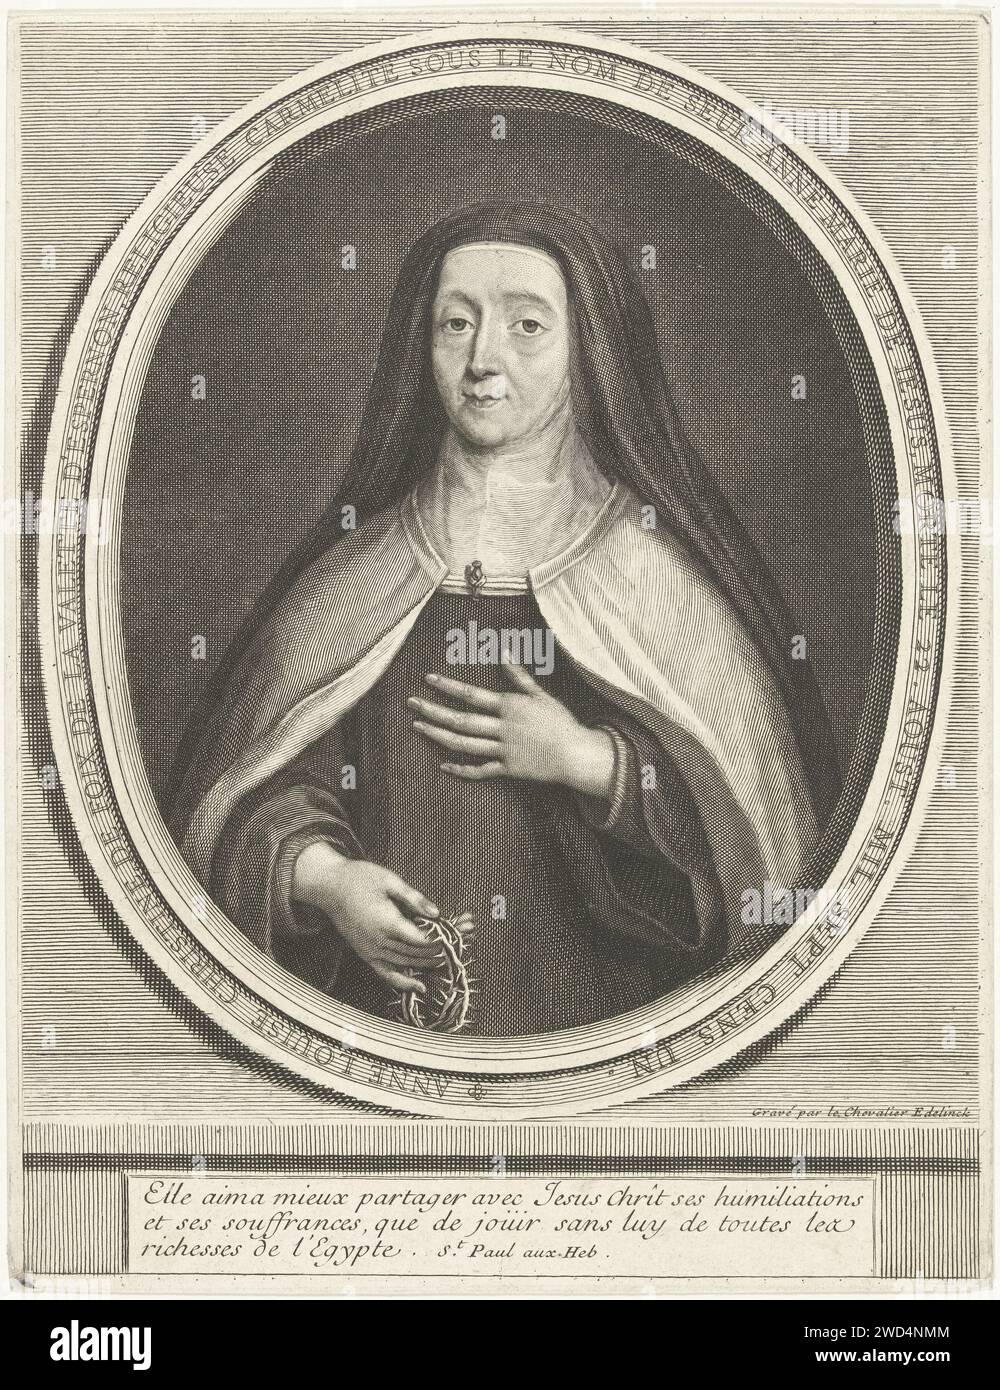 Portret van Anne-Louise-Christine de Foix de la Valette d'Epernon, Gerard Edelinck, 1652-1707 print Portrait of Karmelietes Sister Anne-Louise-Christine de Foix de la Valette d'Epernon (1622-1701). Displayed with thorns in the right hand, in oval frame with text, including three lines of Latin. France (possibly) paper engraving Stock Photo